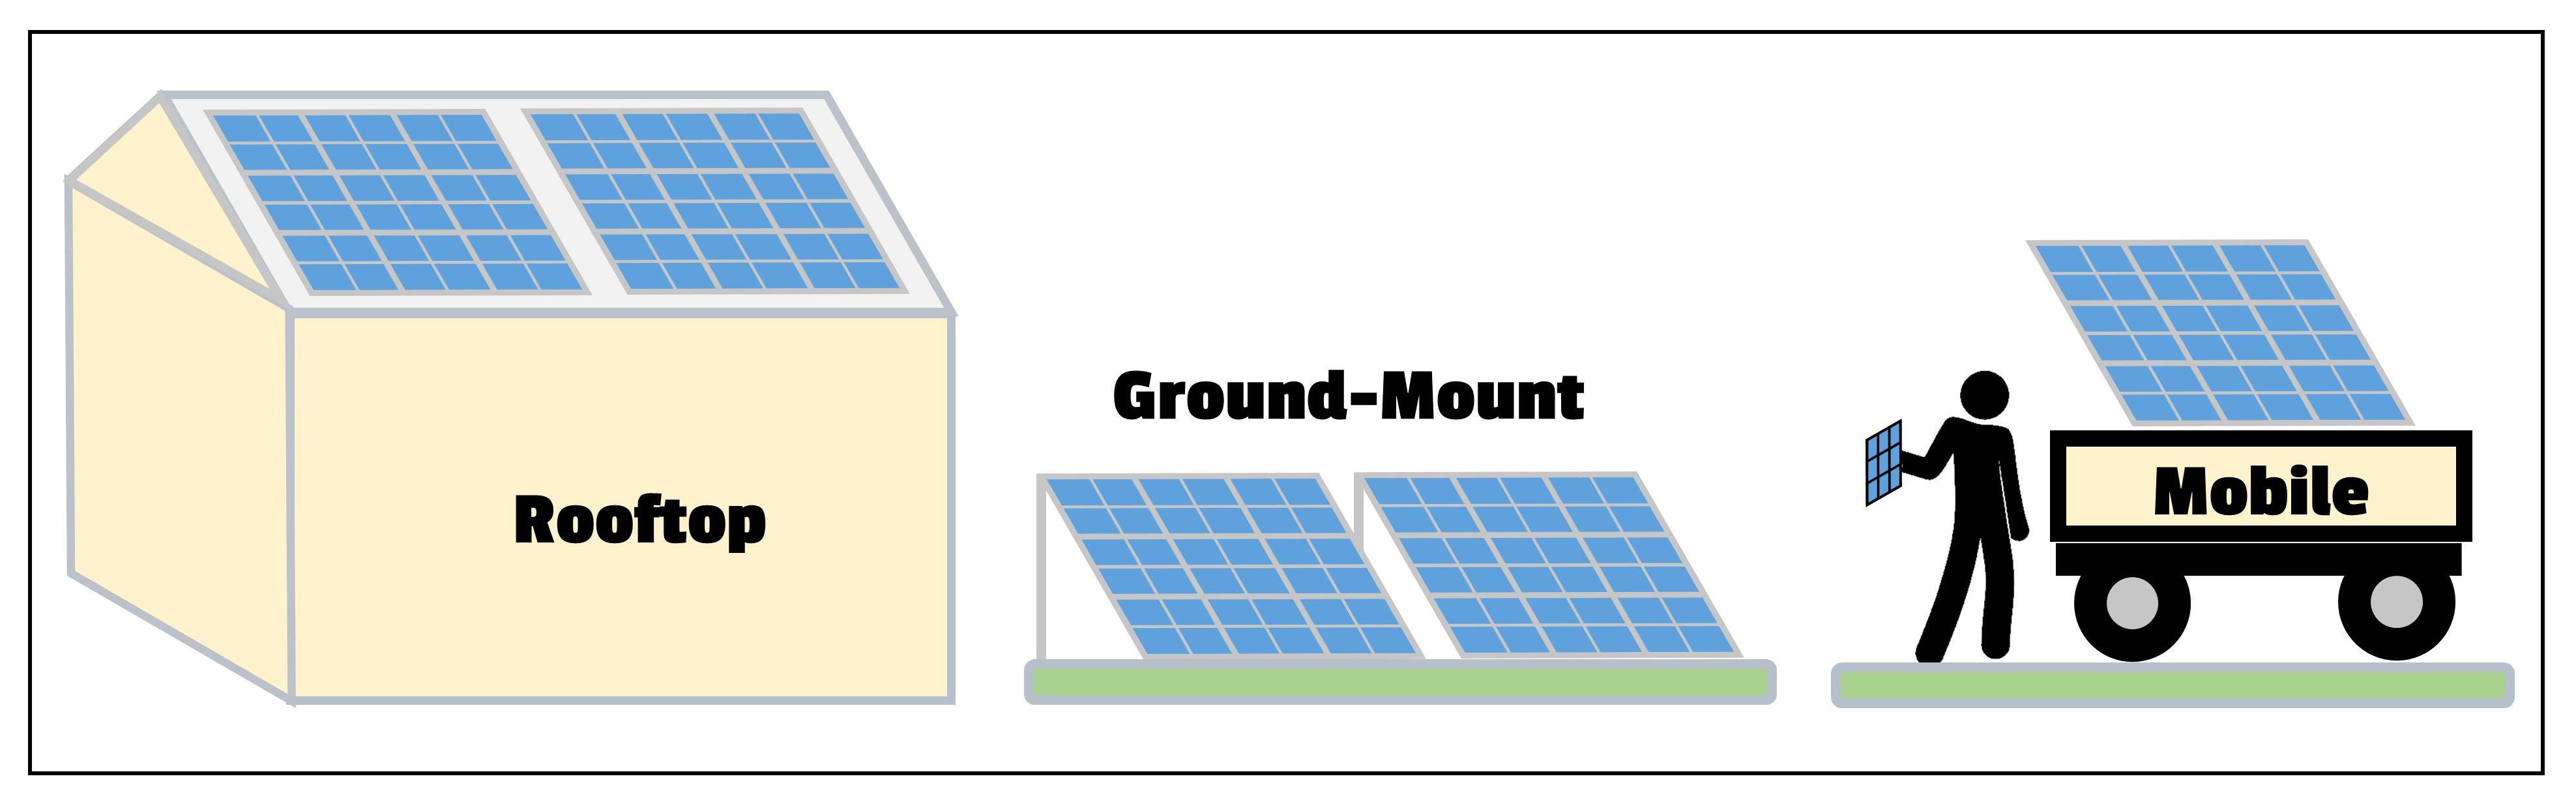 Broad categories of solar photovoltaic (PV) opportunities for installation.